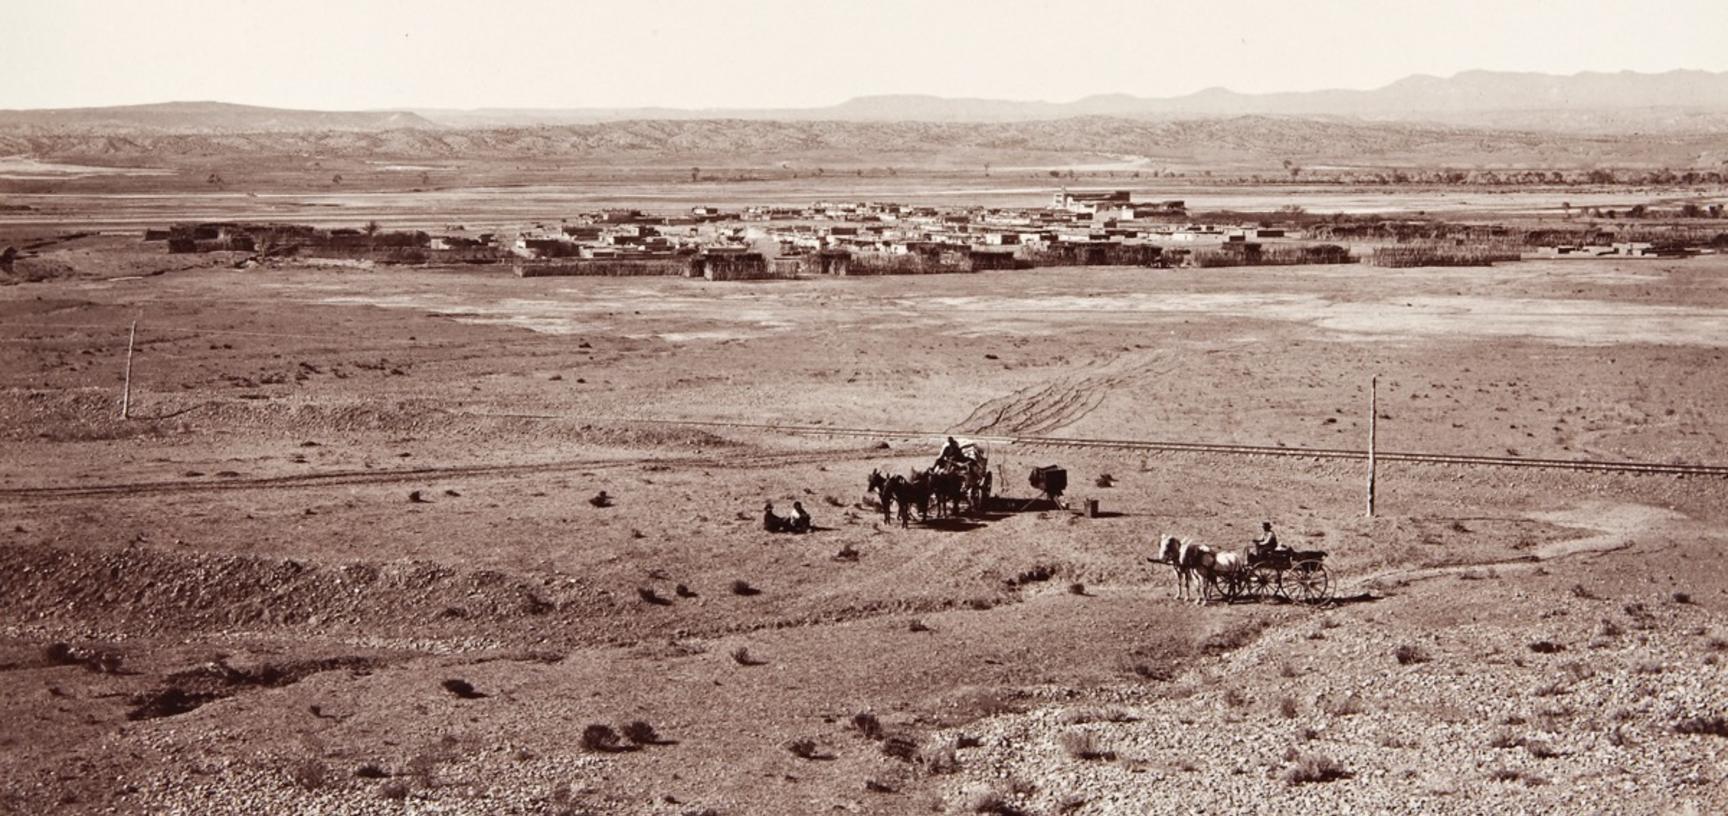 View of Santo Domingo Pueblo (present-day Kewa Pueblo), located about thirty miles south of Santa Fe, with a railway line and telegraph poles visible in the foreground. 